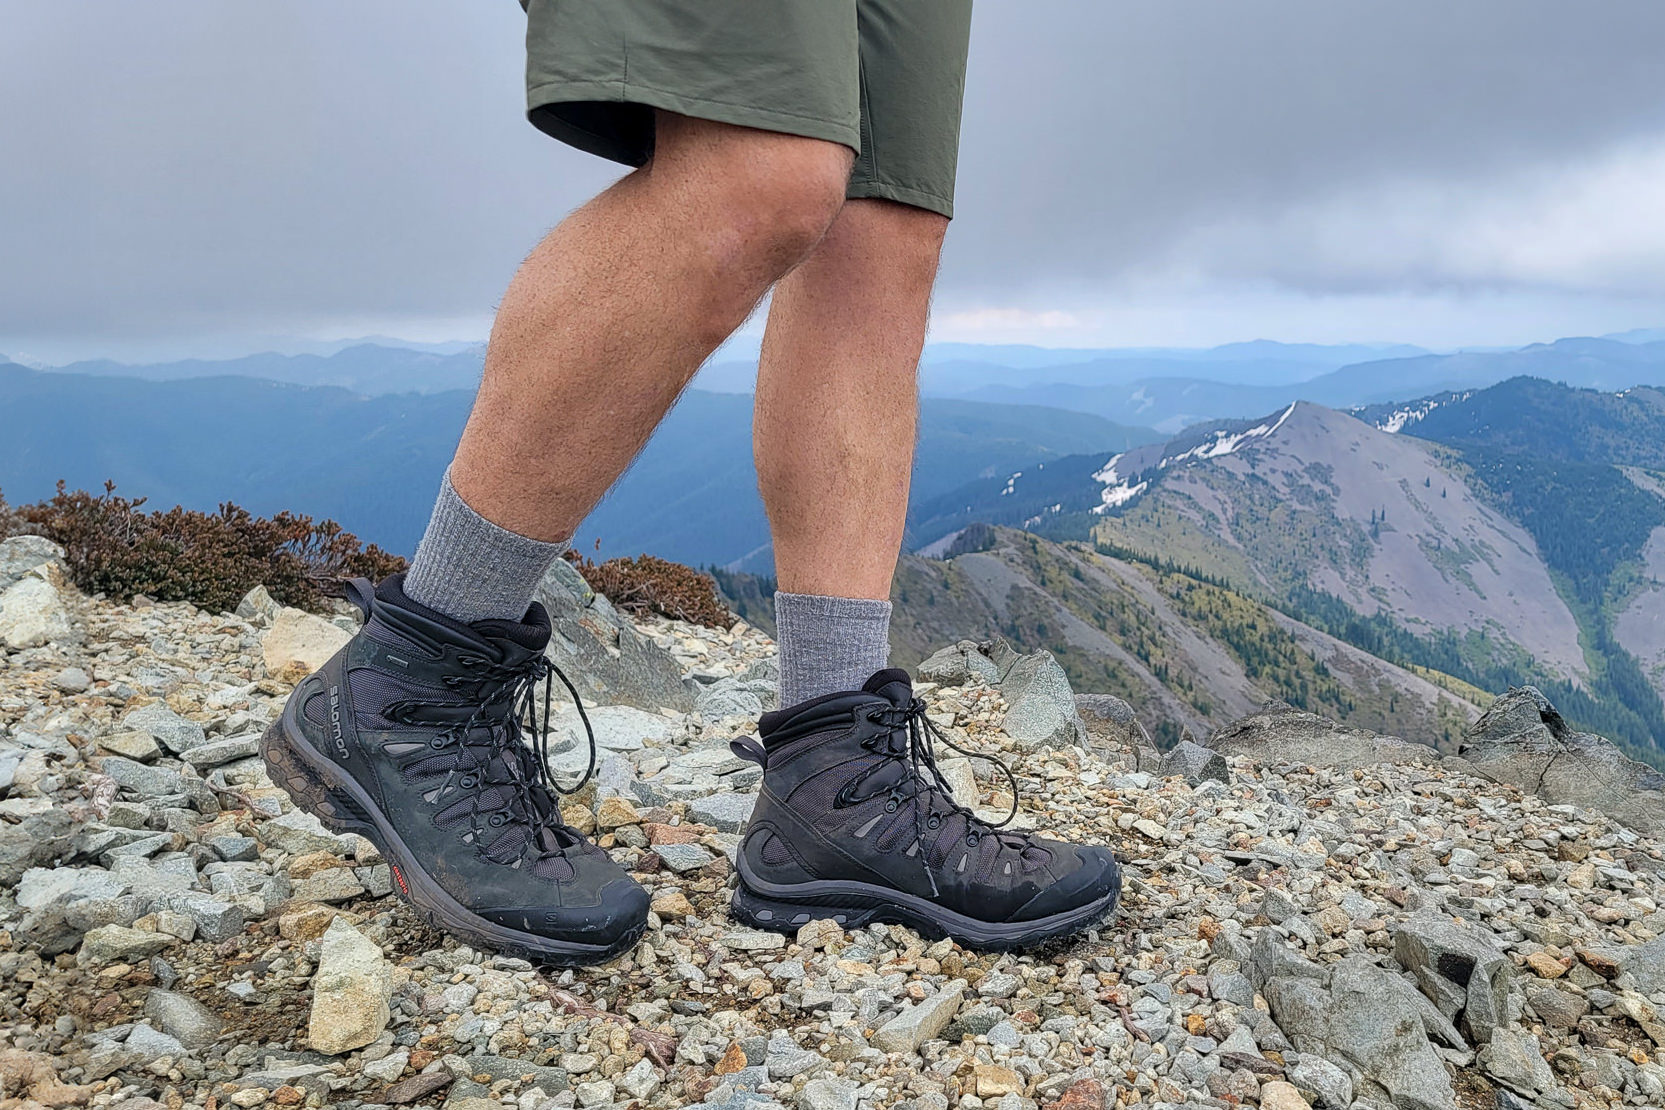 Mountain Warehouse Adventurer Mens Waterproof Hiking Boots : :  Clothing, Shoes & Accessories